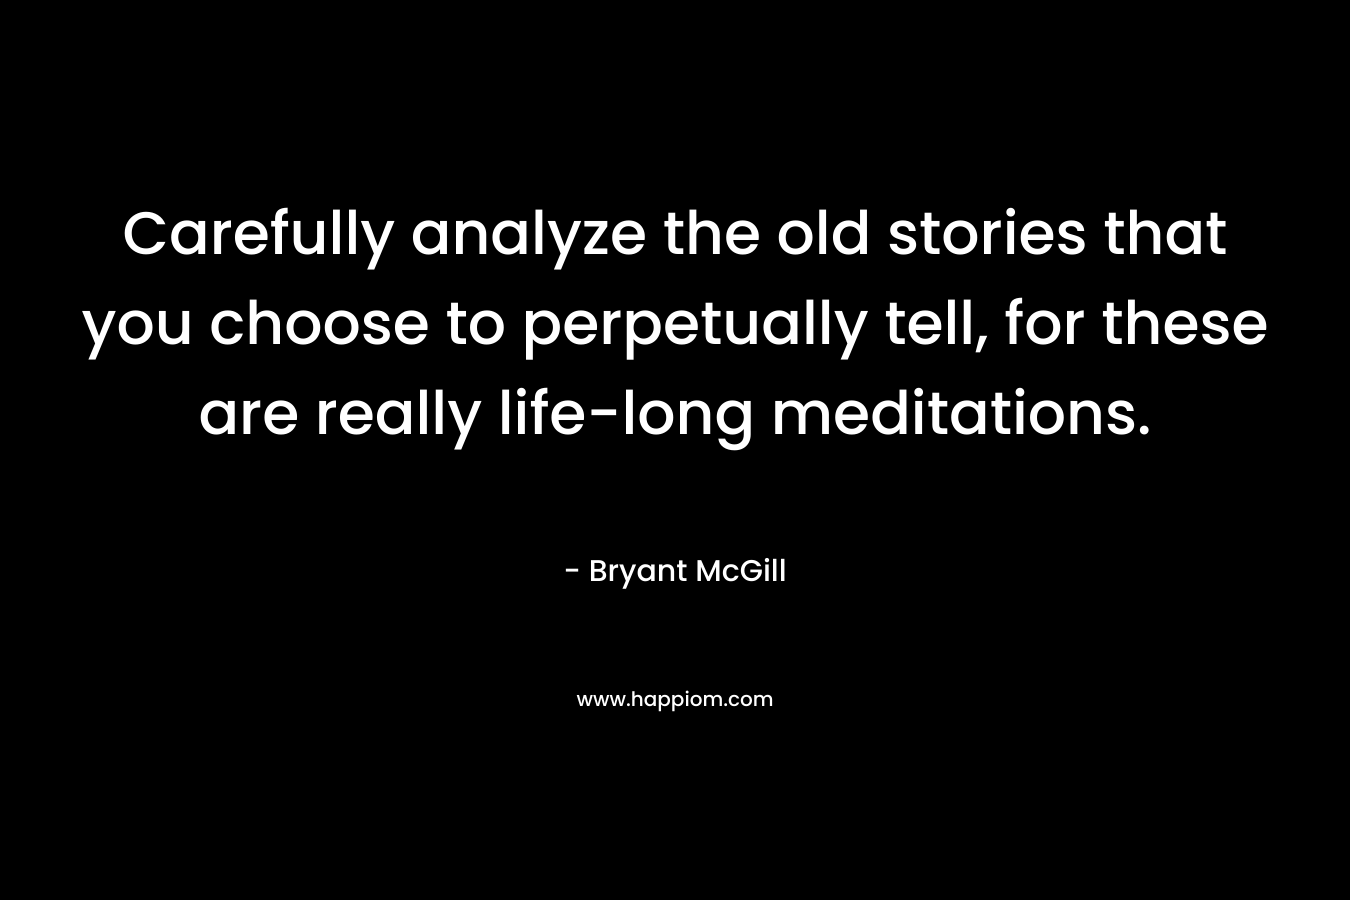 Carefully analyze the old stories that you choose to perpetually tell, for these are really life-long meditations.